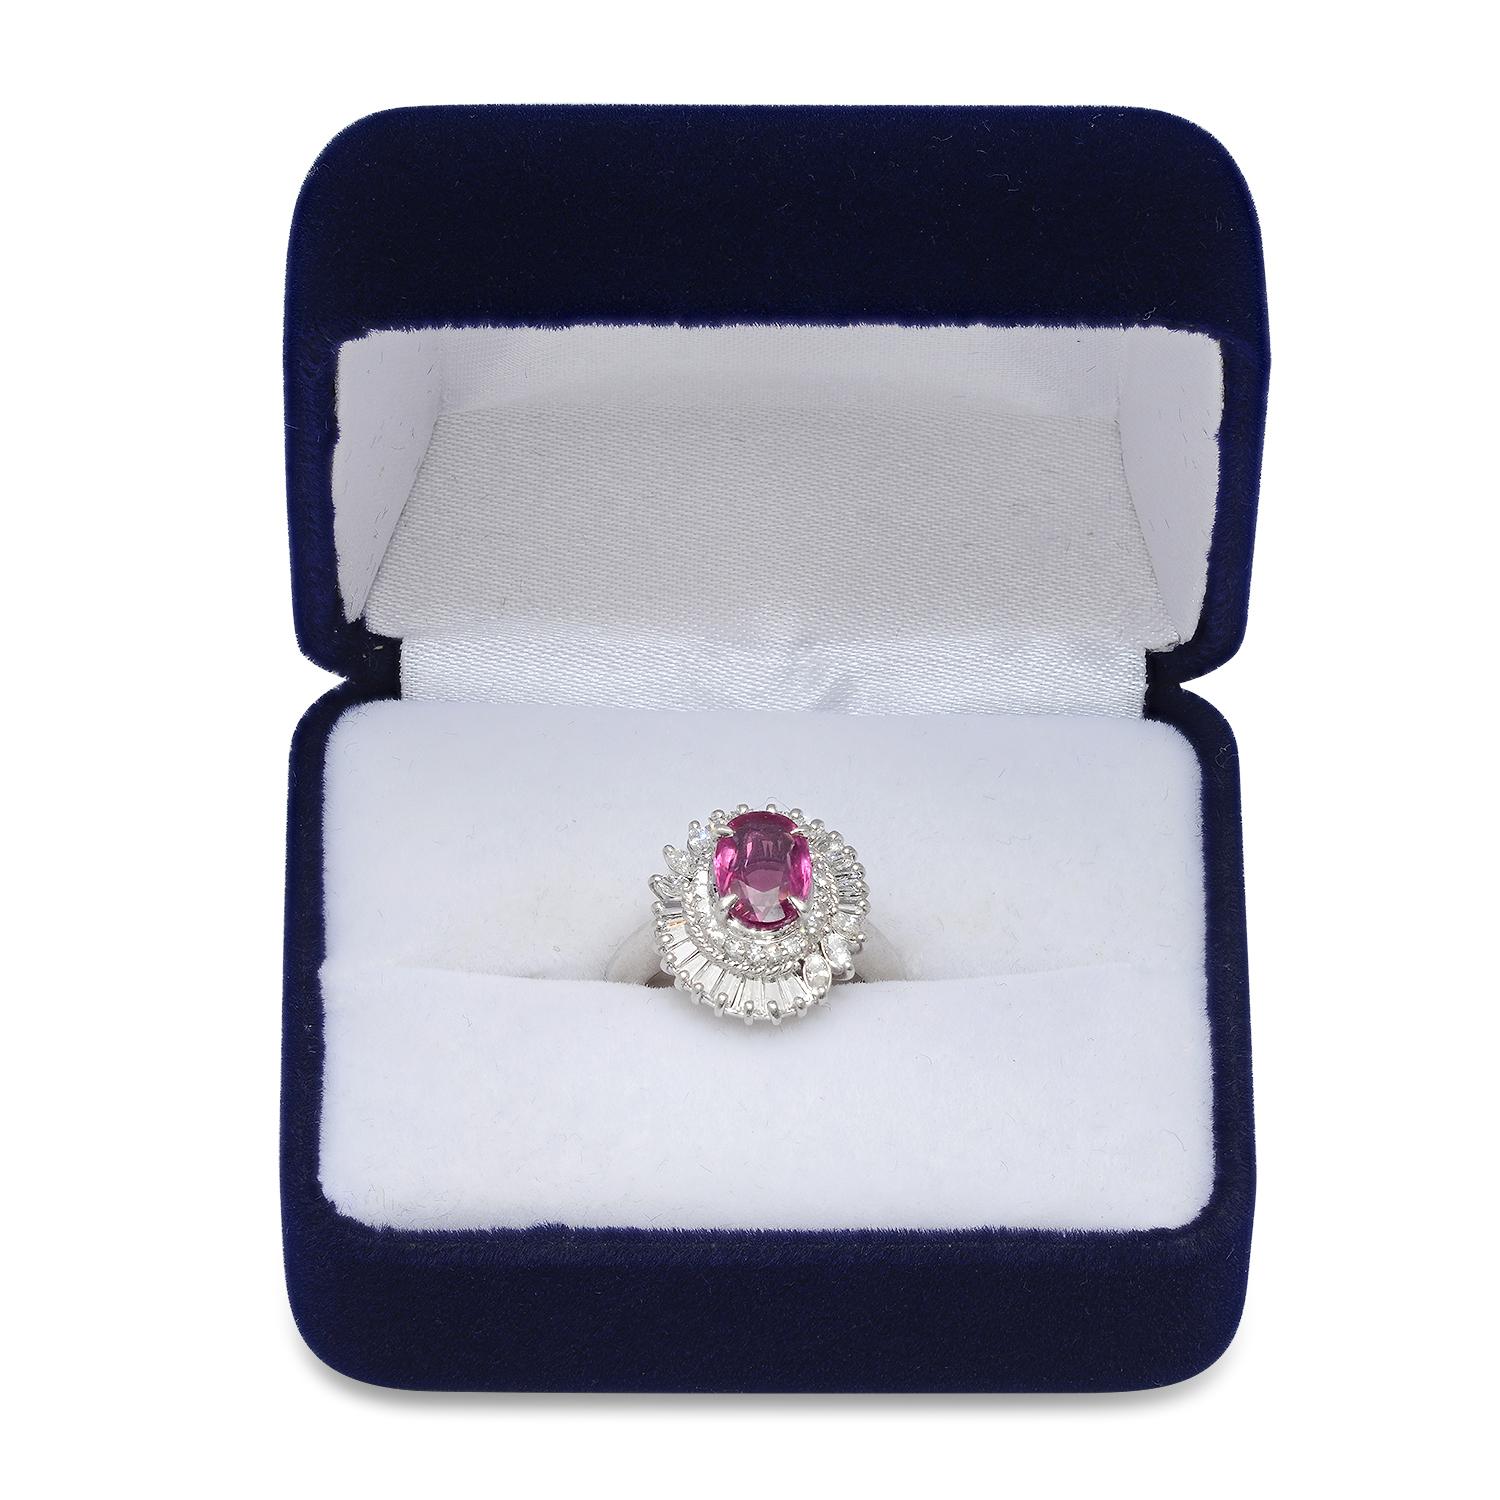 Platinum Setting with 2.01ct Ruby and 1.05ct Diamond Ladies Ring